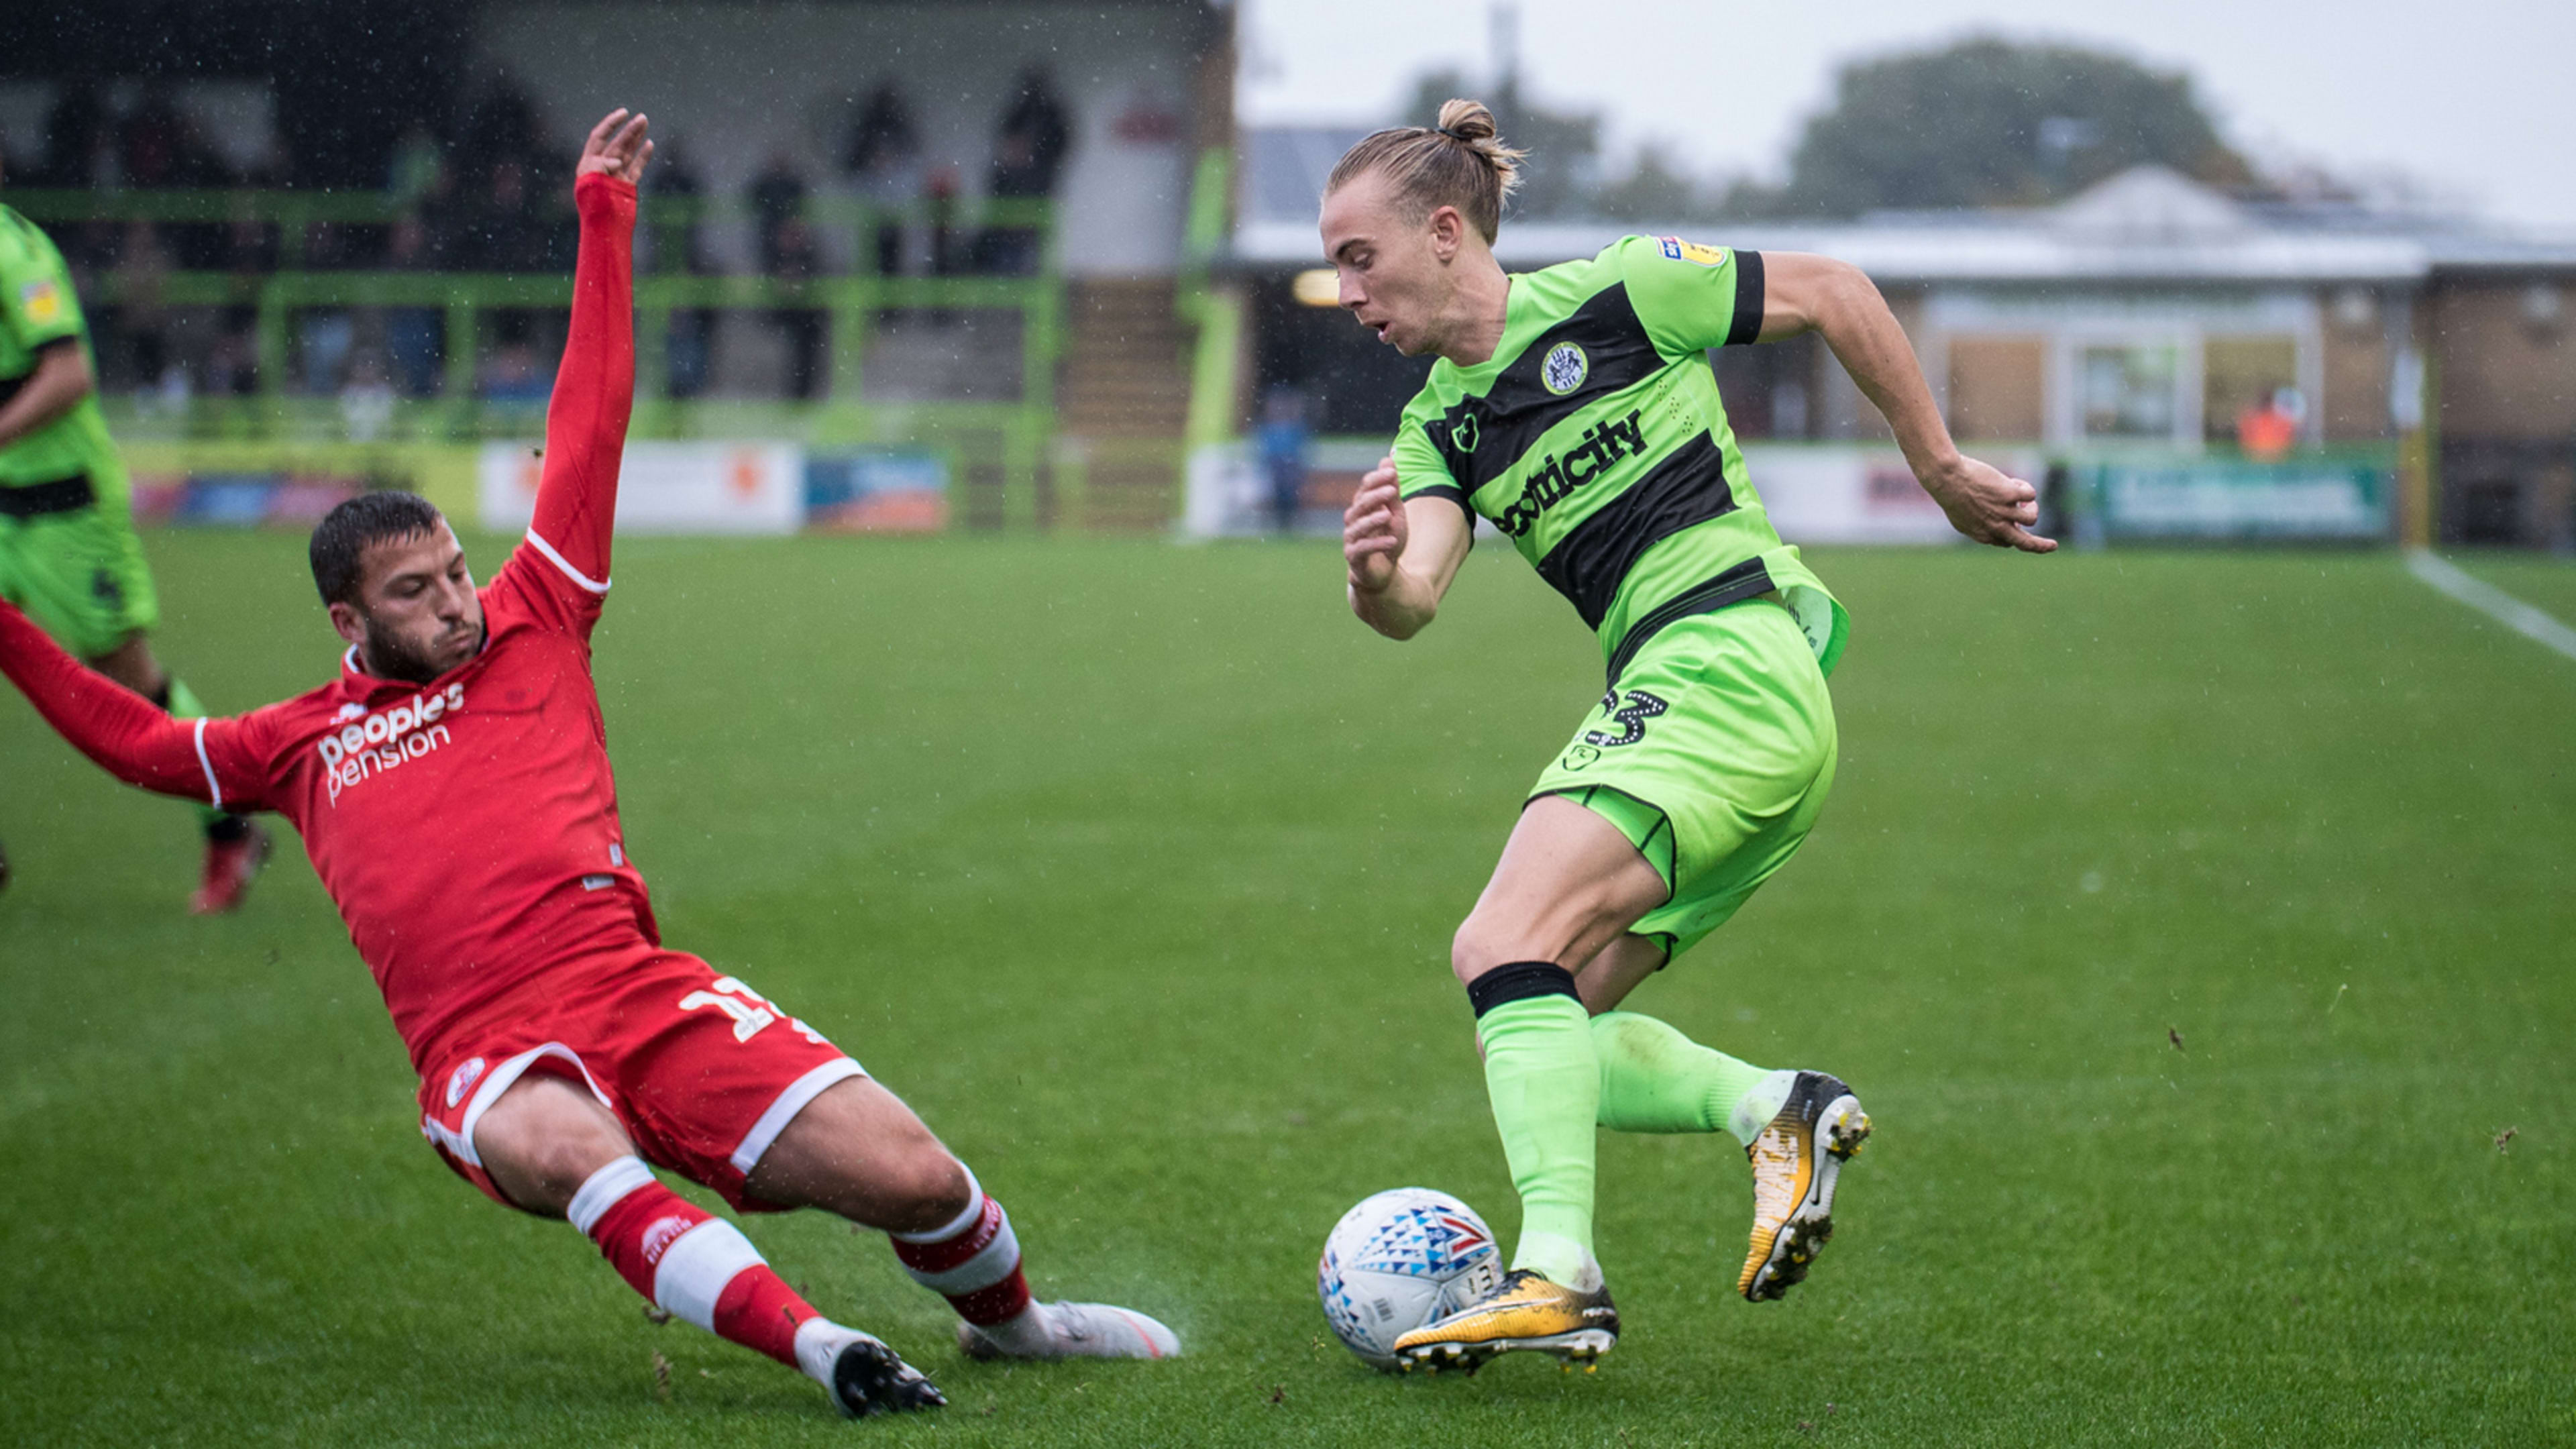 Meet Forest Green Rovers, the British soccer team that’s carbon neutral, vegan, and on a mission